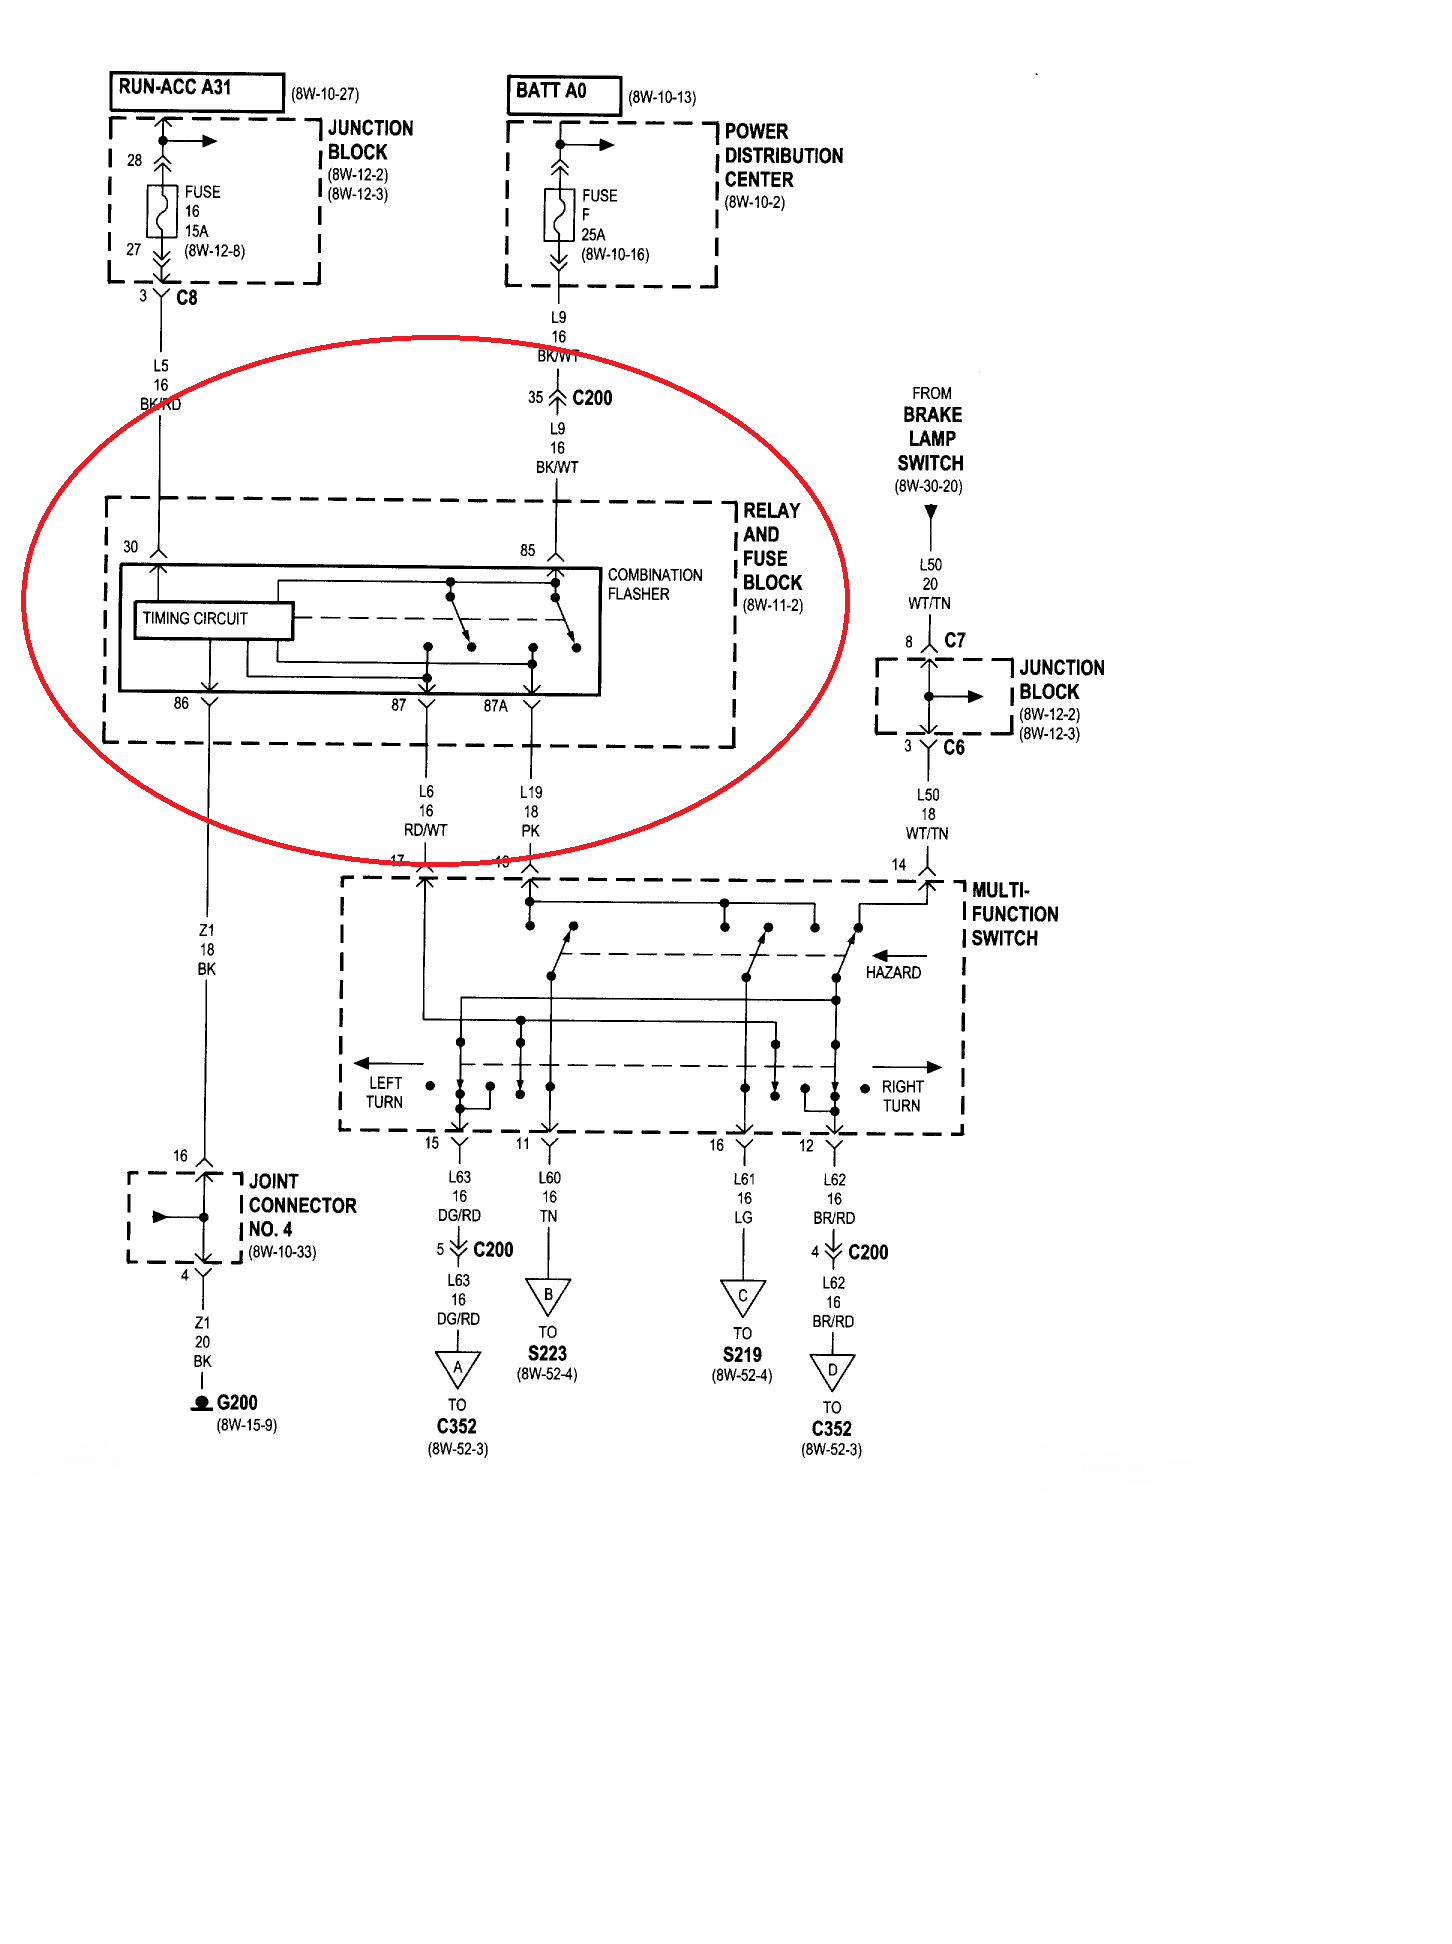 2000 Dodge Dakota Stereo Wiring Diagram Collection Wiring Collection